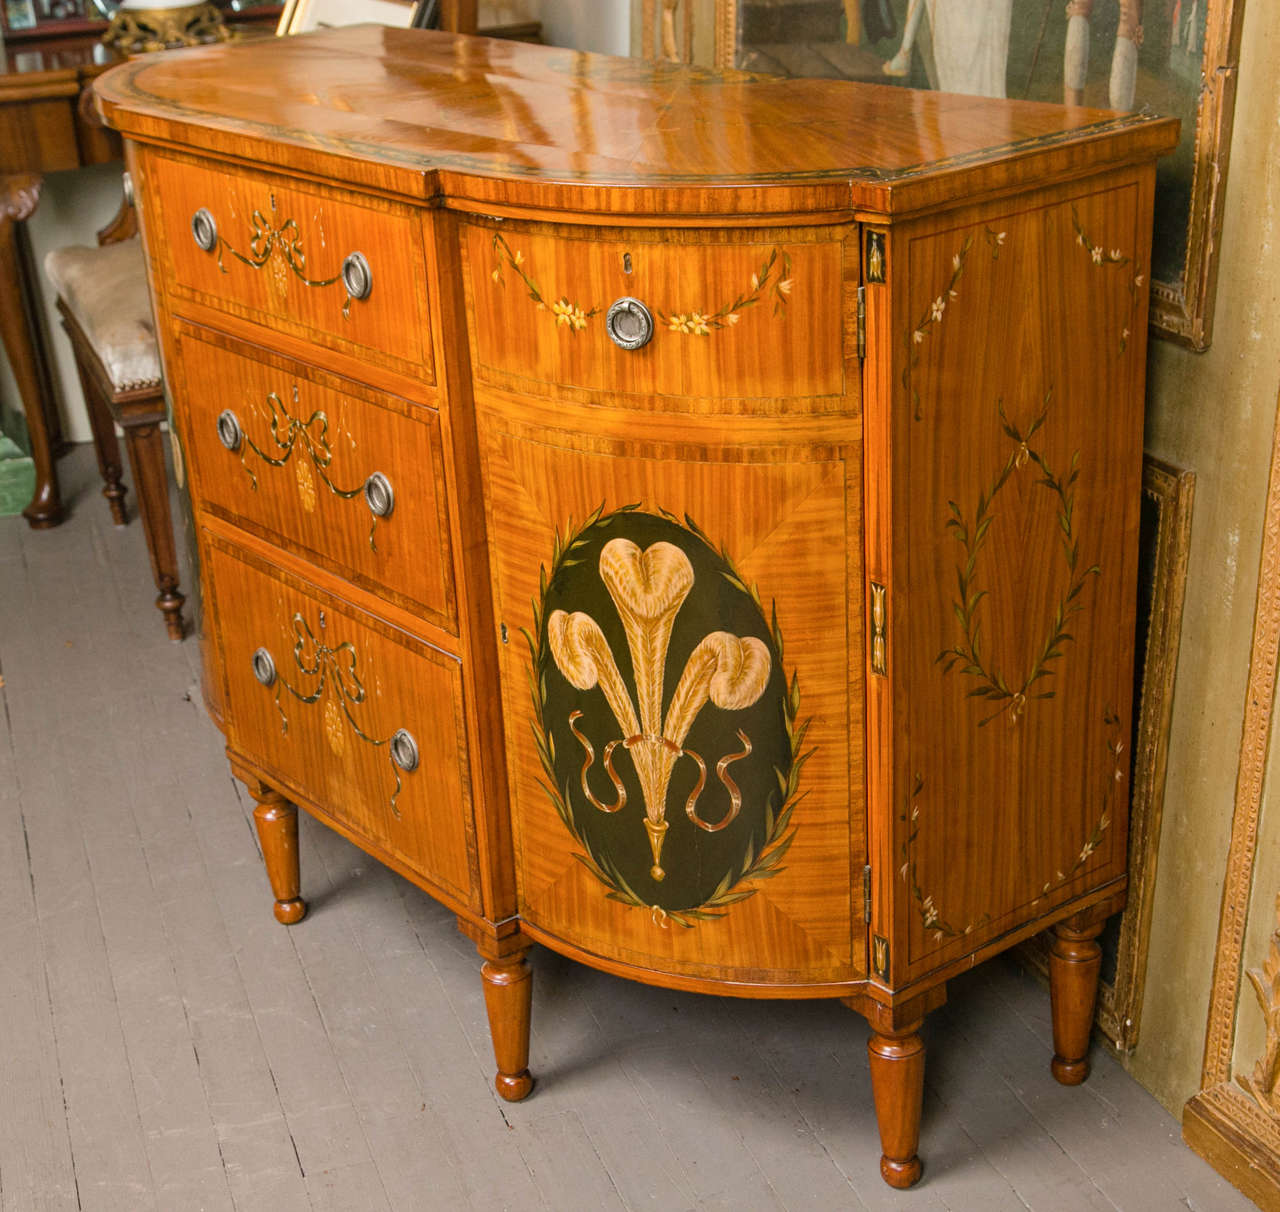 Three central drawers flanked by swing out, curved door cabinets.
Of Satinwood or Kingwood,  with hand painted decoration including Prince of  Wales  feathers, swags, bows, small flowers. Cross banded   drawer and cabinet fronts.